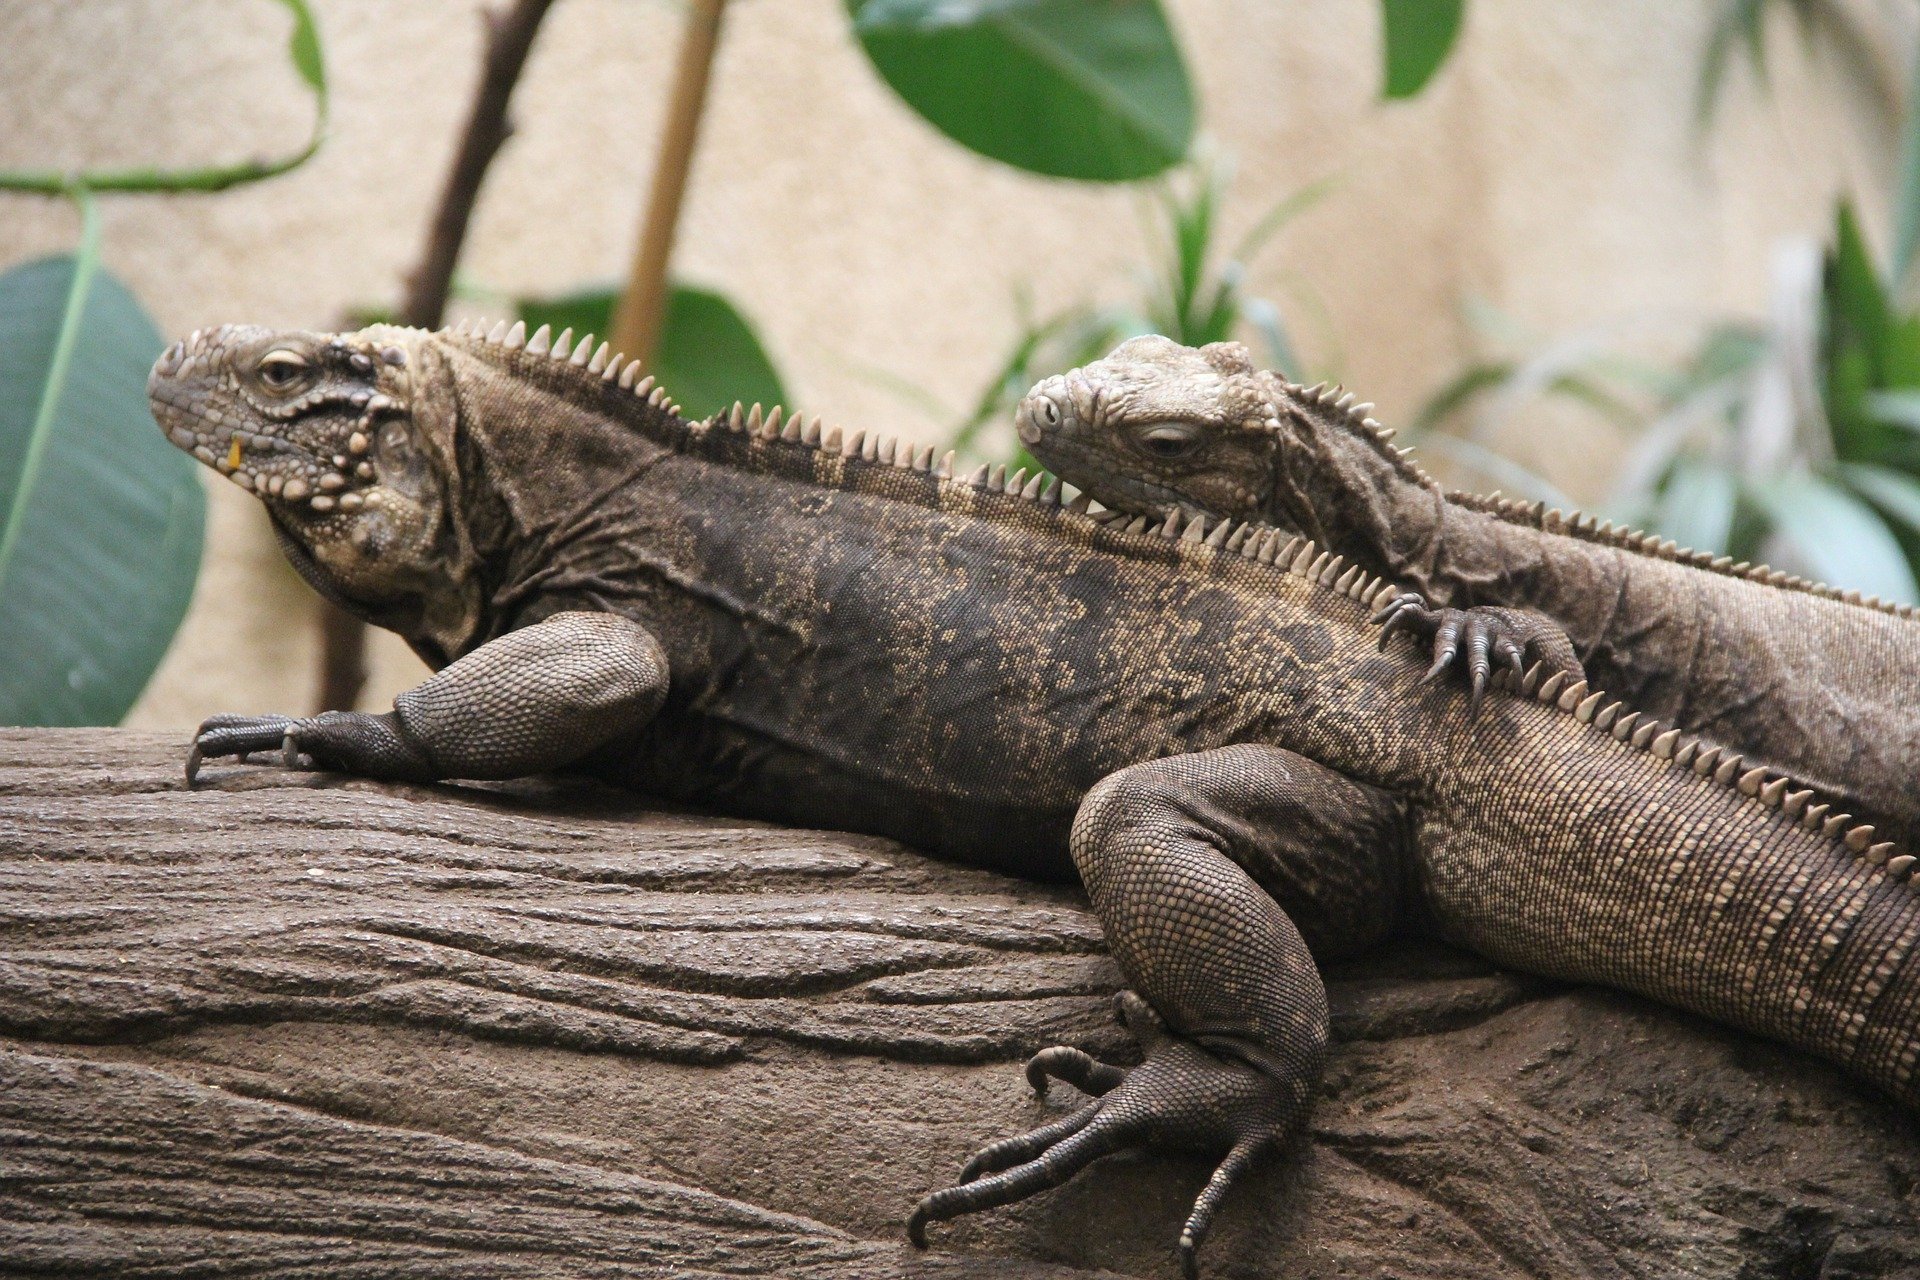 Reptiles. Click to see more of Adorable Animal Pictures for Valentine’s Day | Animals Zone